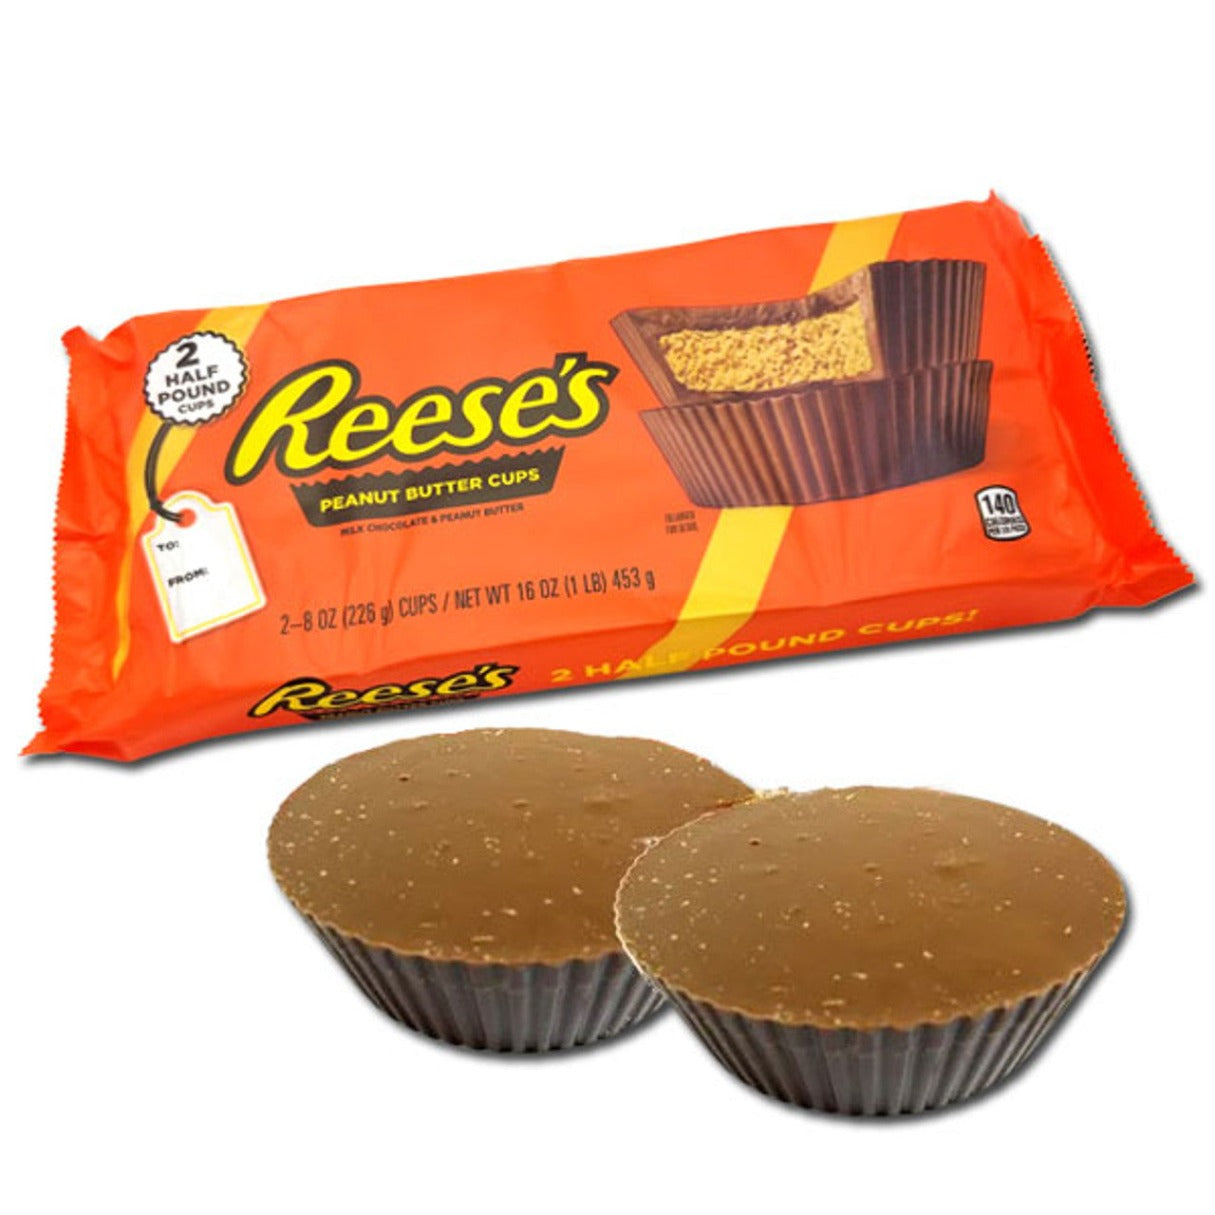 Reese's Super Giant Peanut Butter Cups 16oz - 12ct